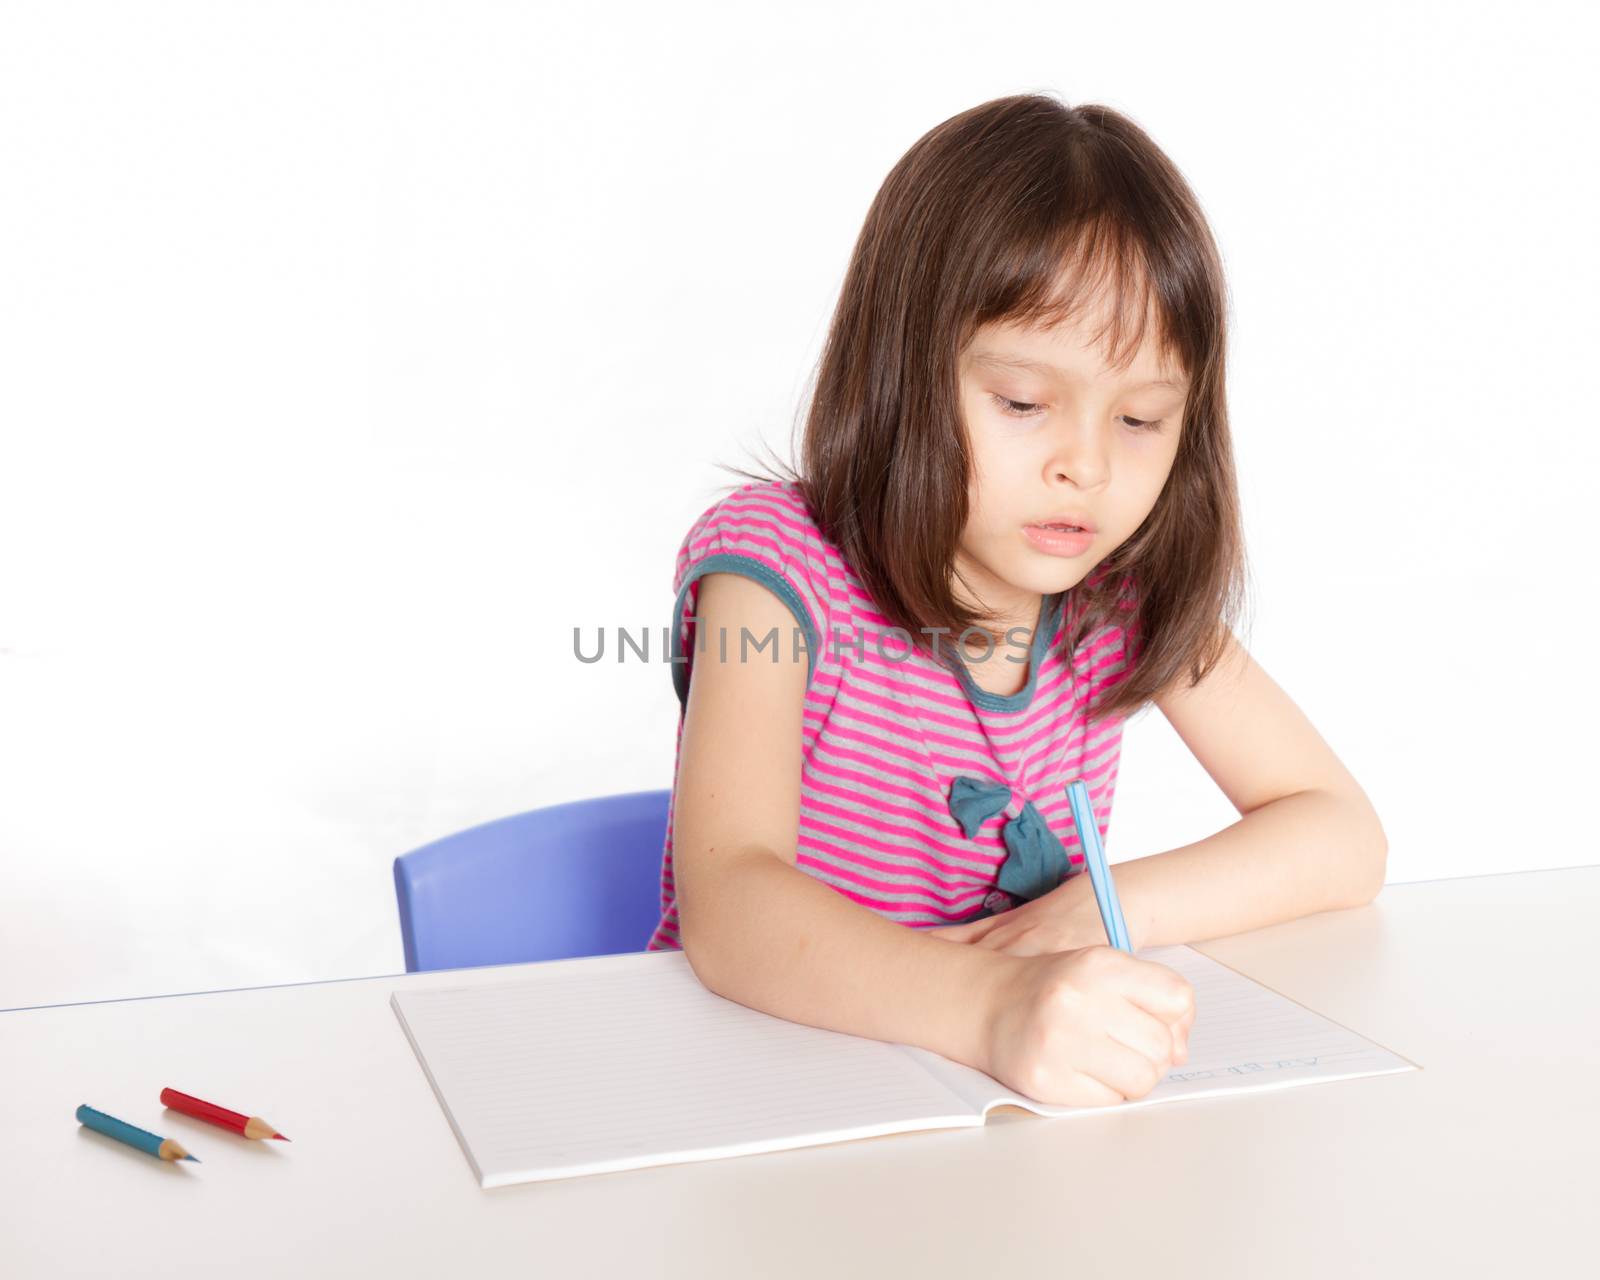 Child at desk with pencils and notebook